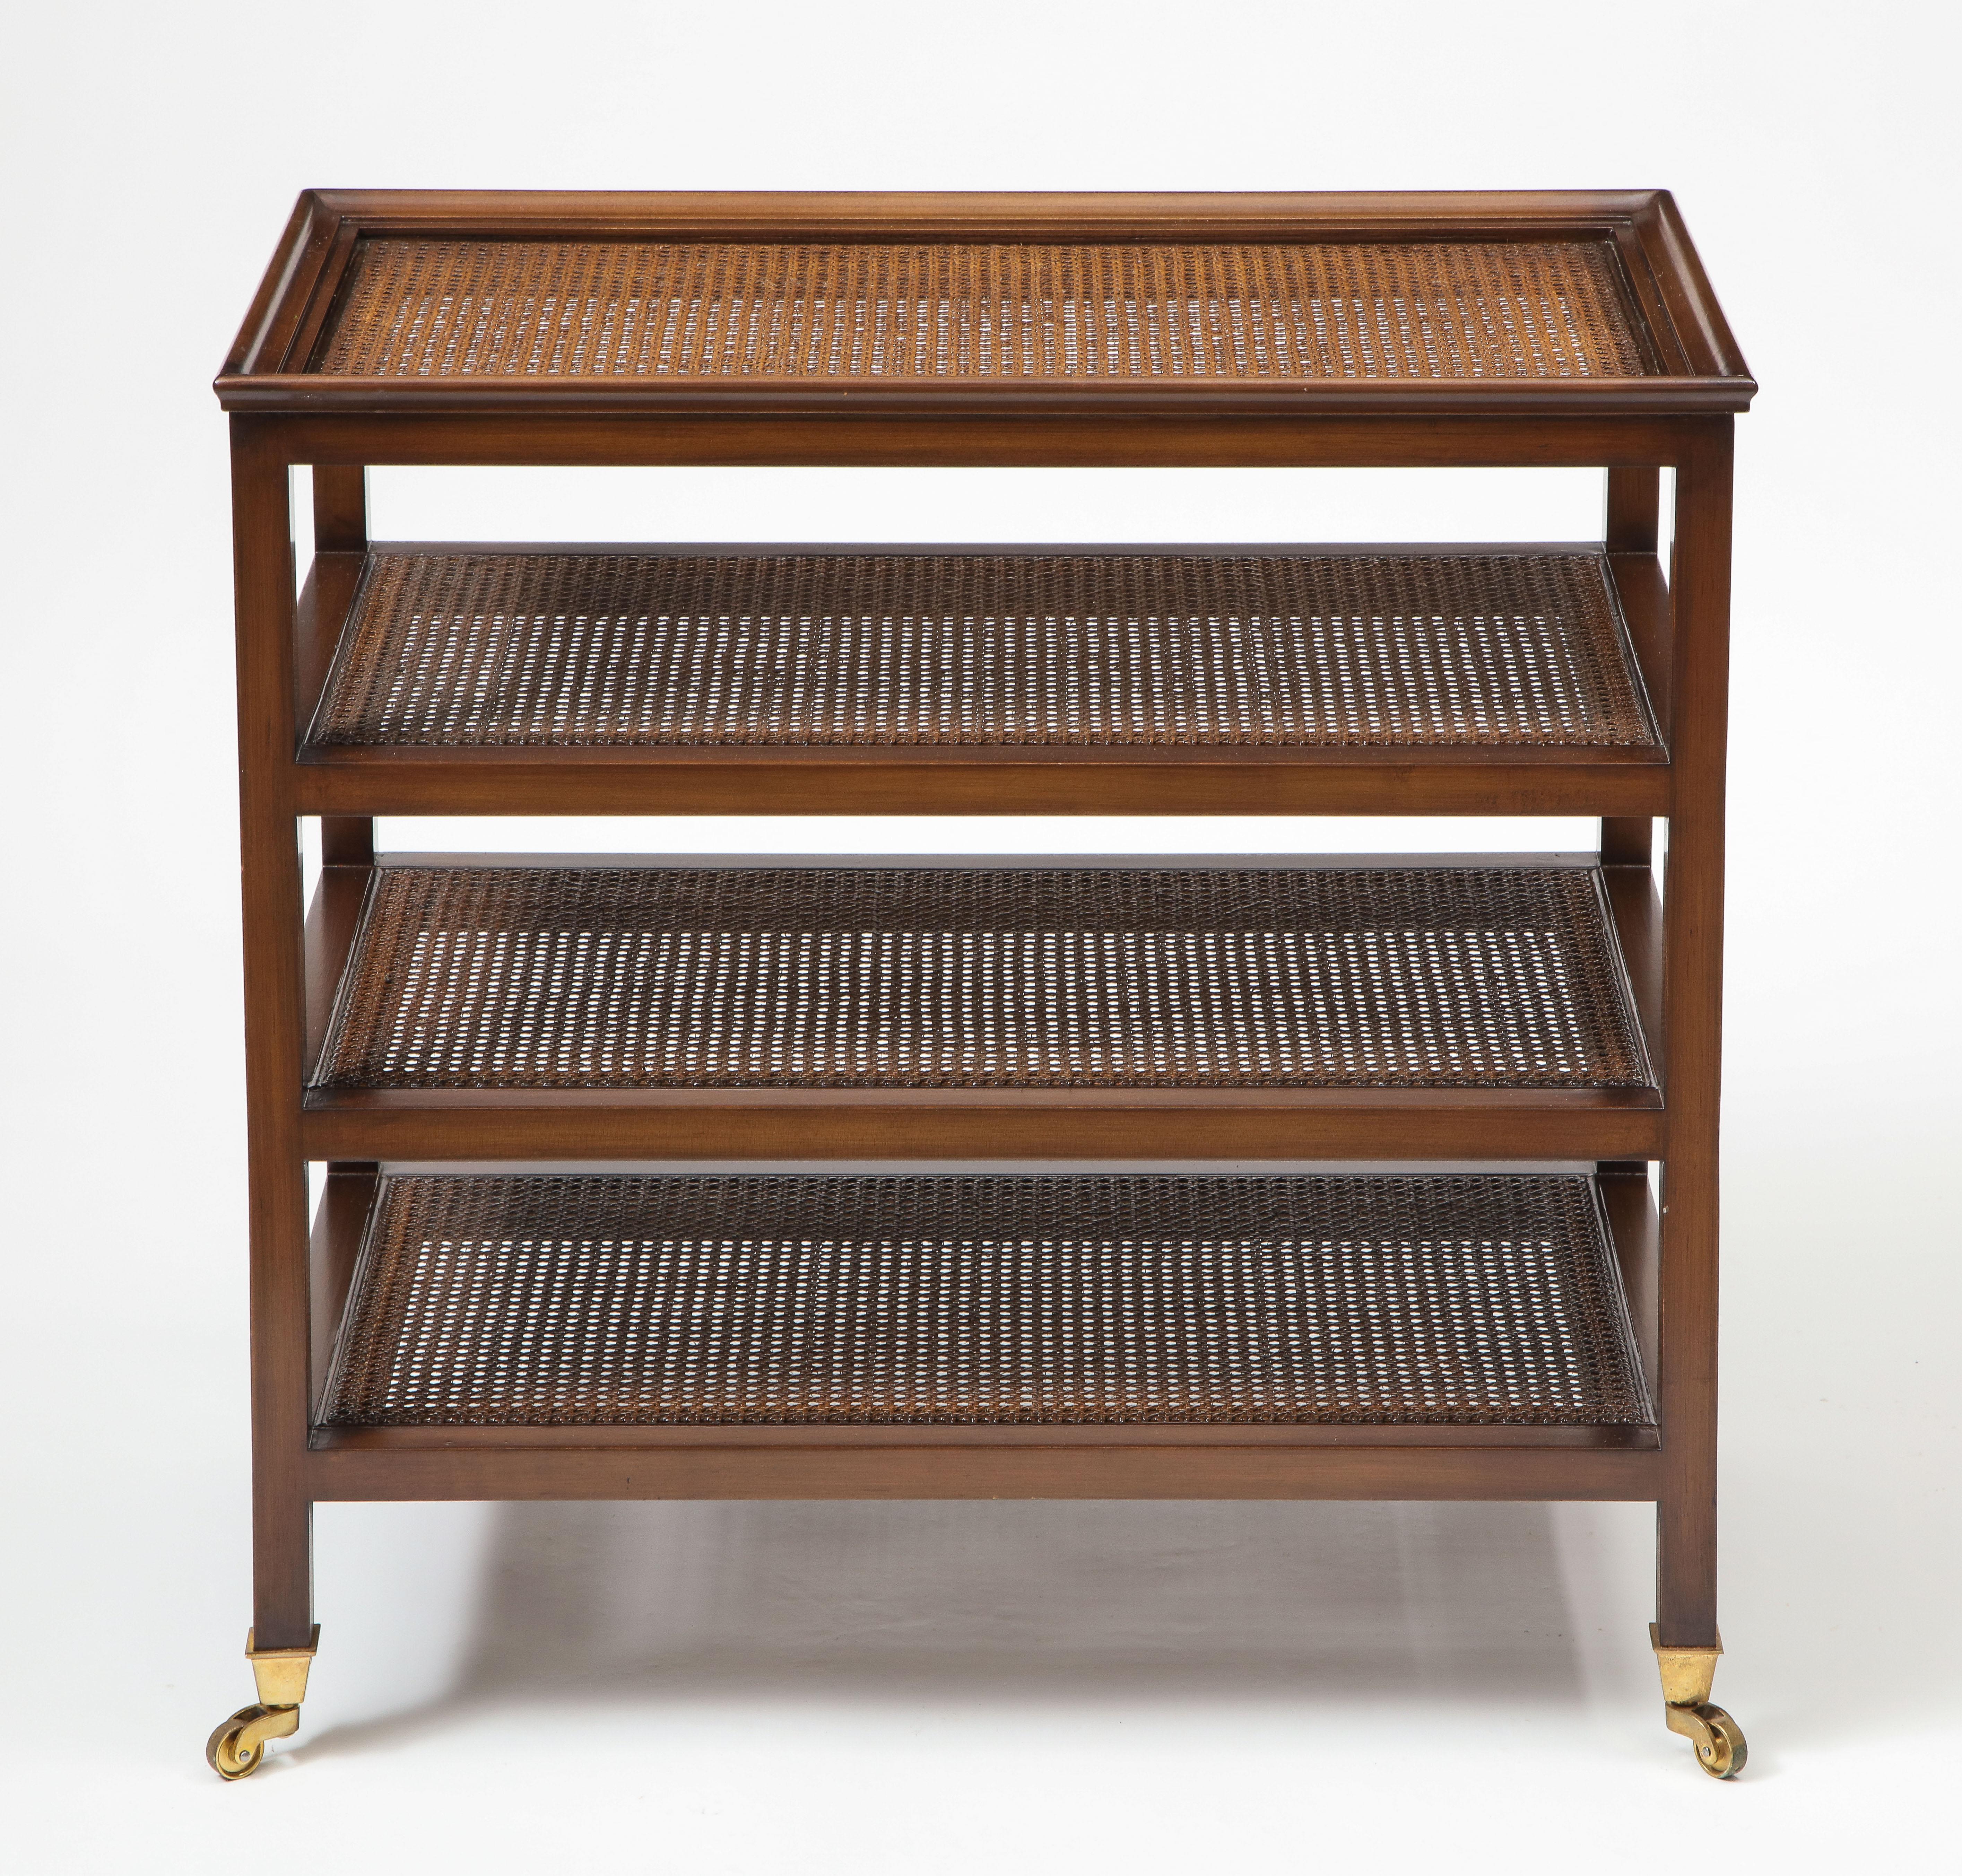 The wood étagère stained in walnut with four caned shelves; on brass caps and casters.